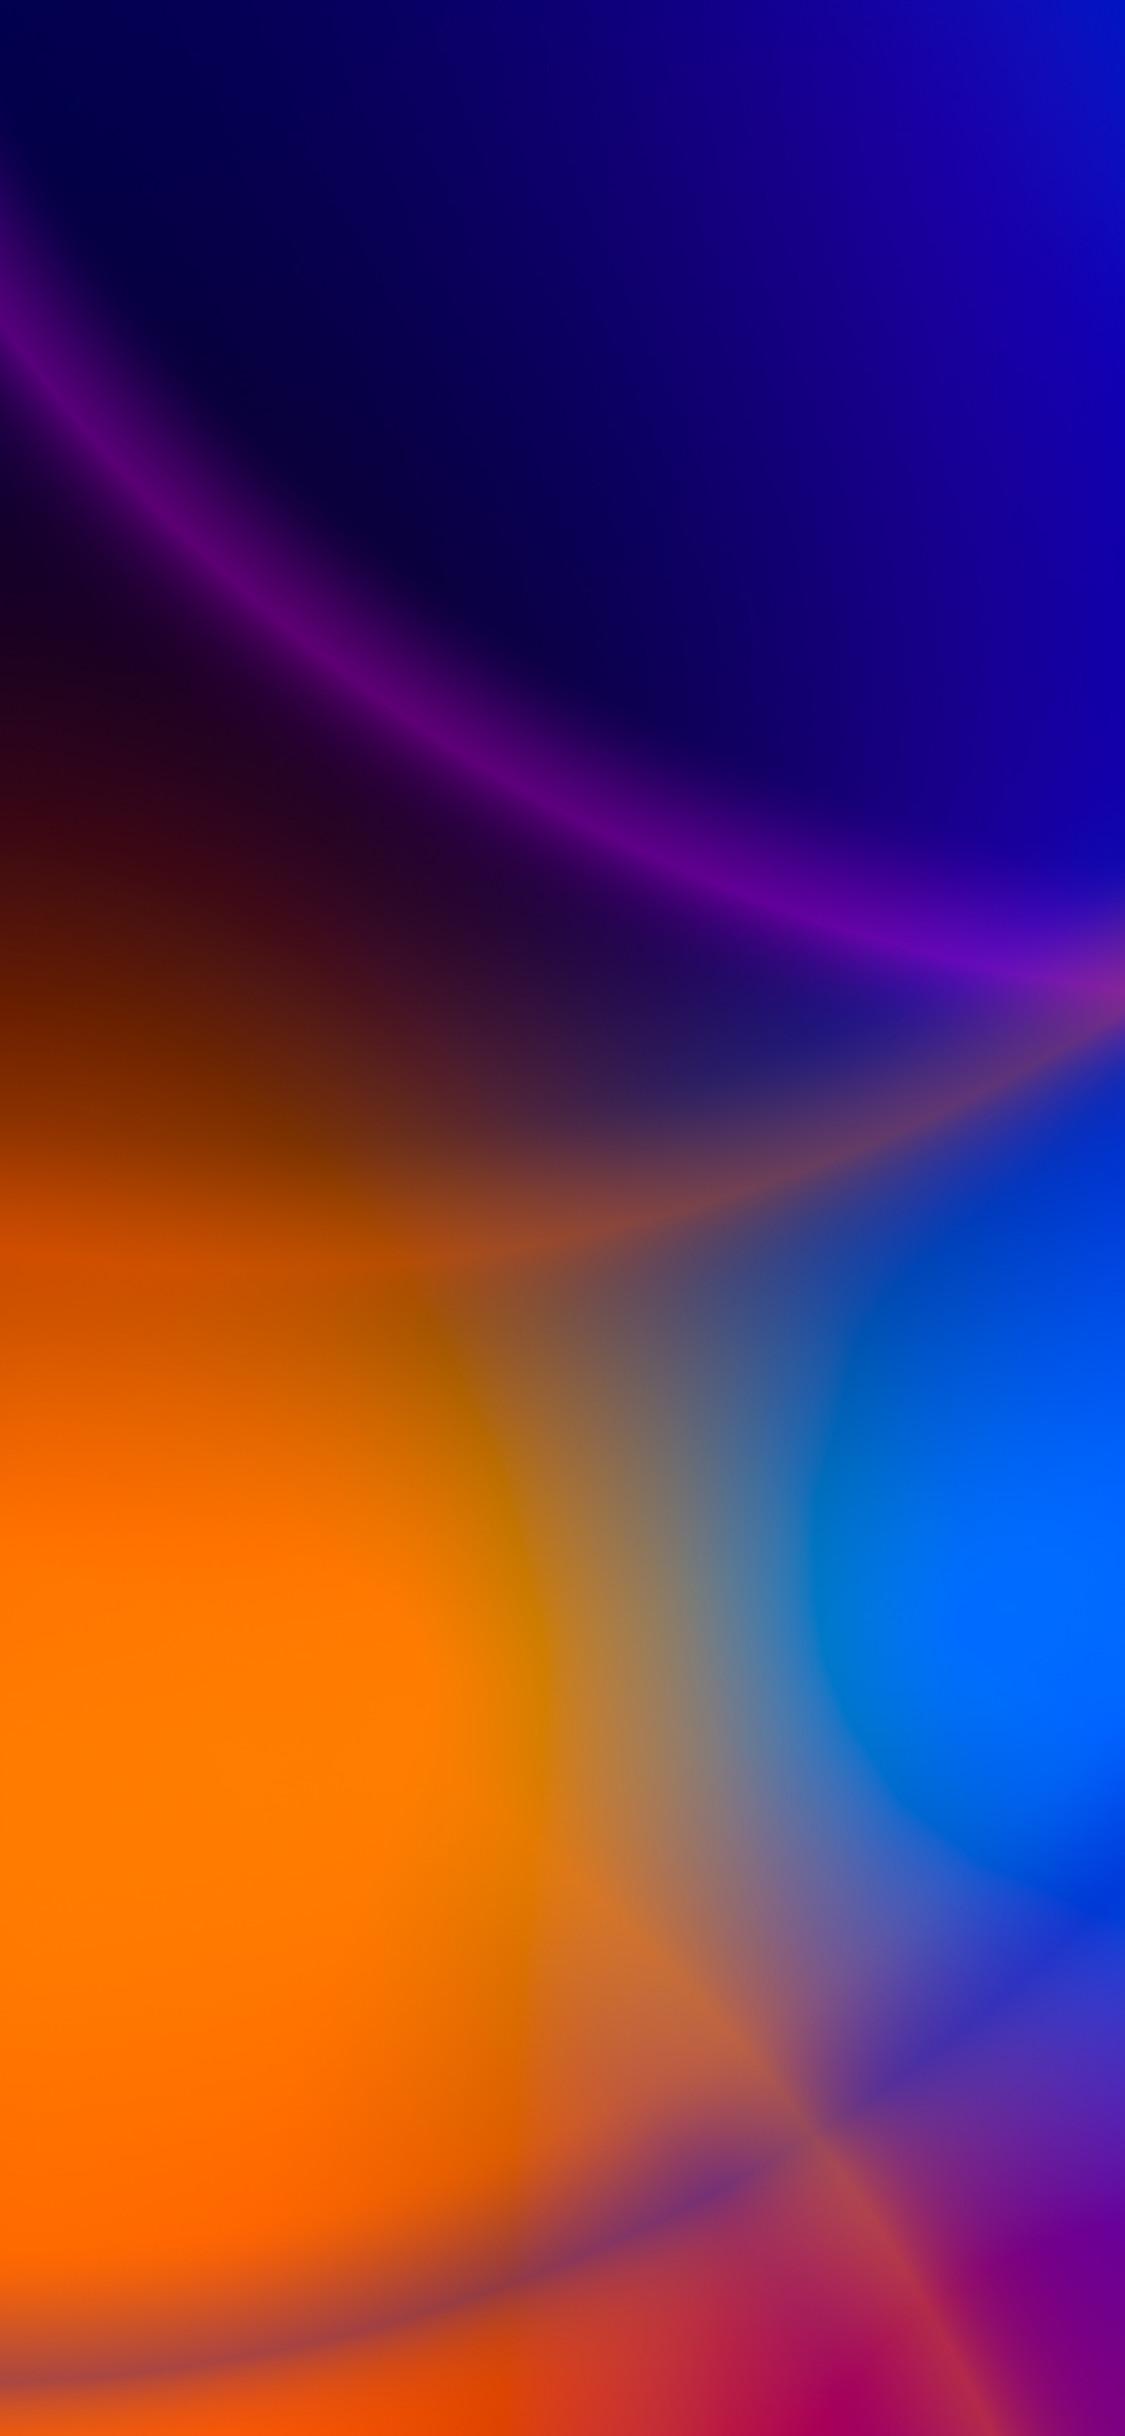 Abstract Blur Wallpapers - Top Free Abstract Blur Backgrounds ...